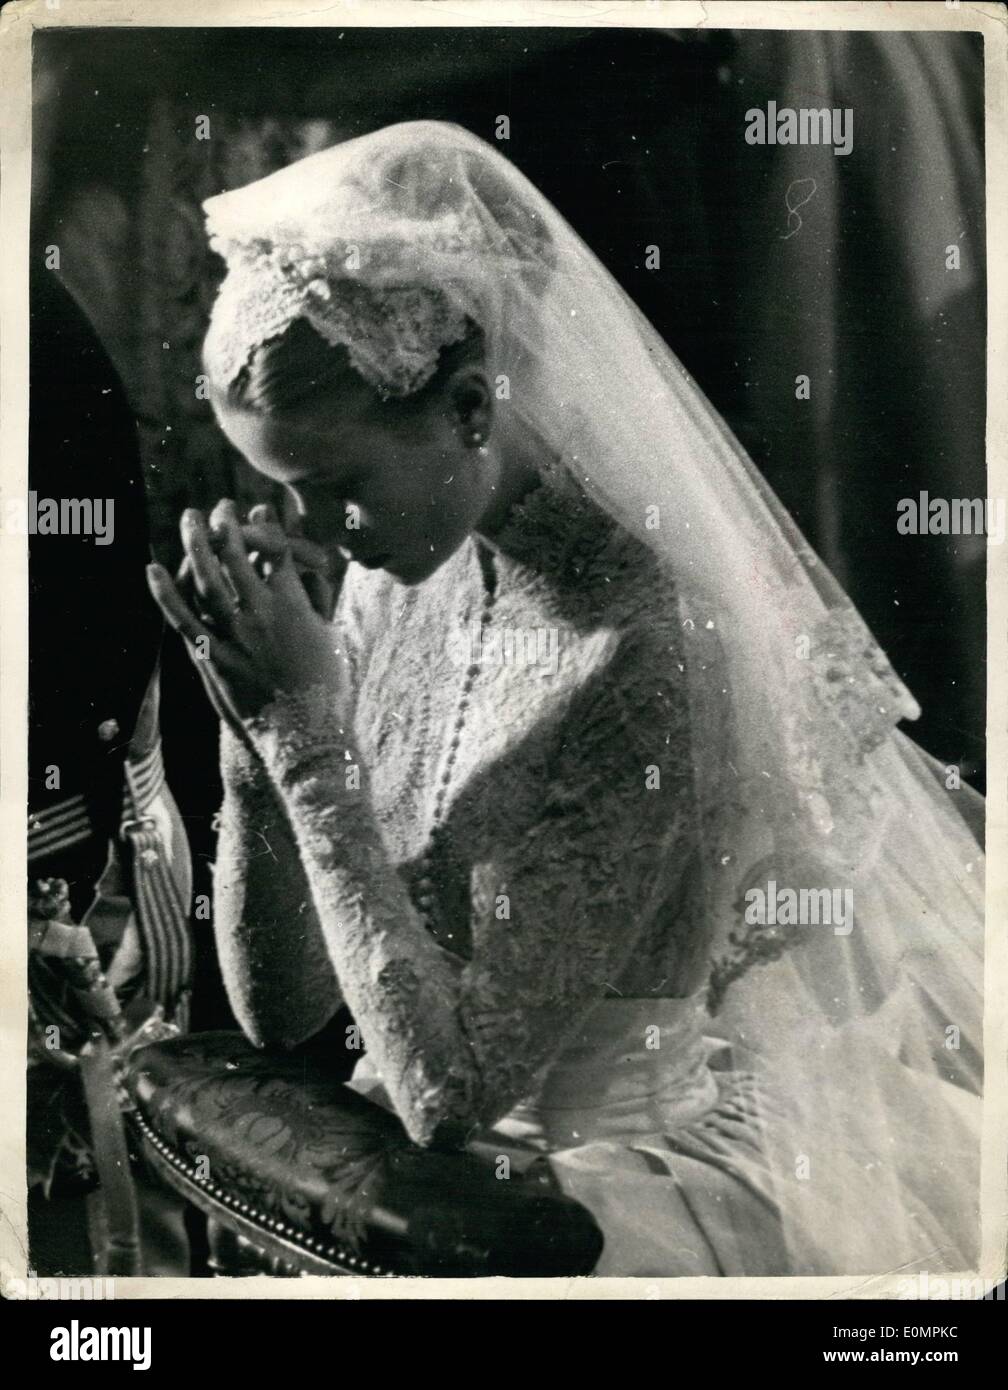 Apr. 19, 1956 - 19-4-56 Prince Rainier and Grace Kelly marry at Monaco Cathedral. Photo Shows: Princess Grace in prayer, a solemn moment in the religious ceremony. Stock Photo